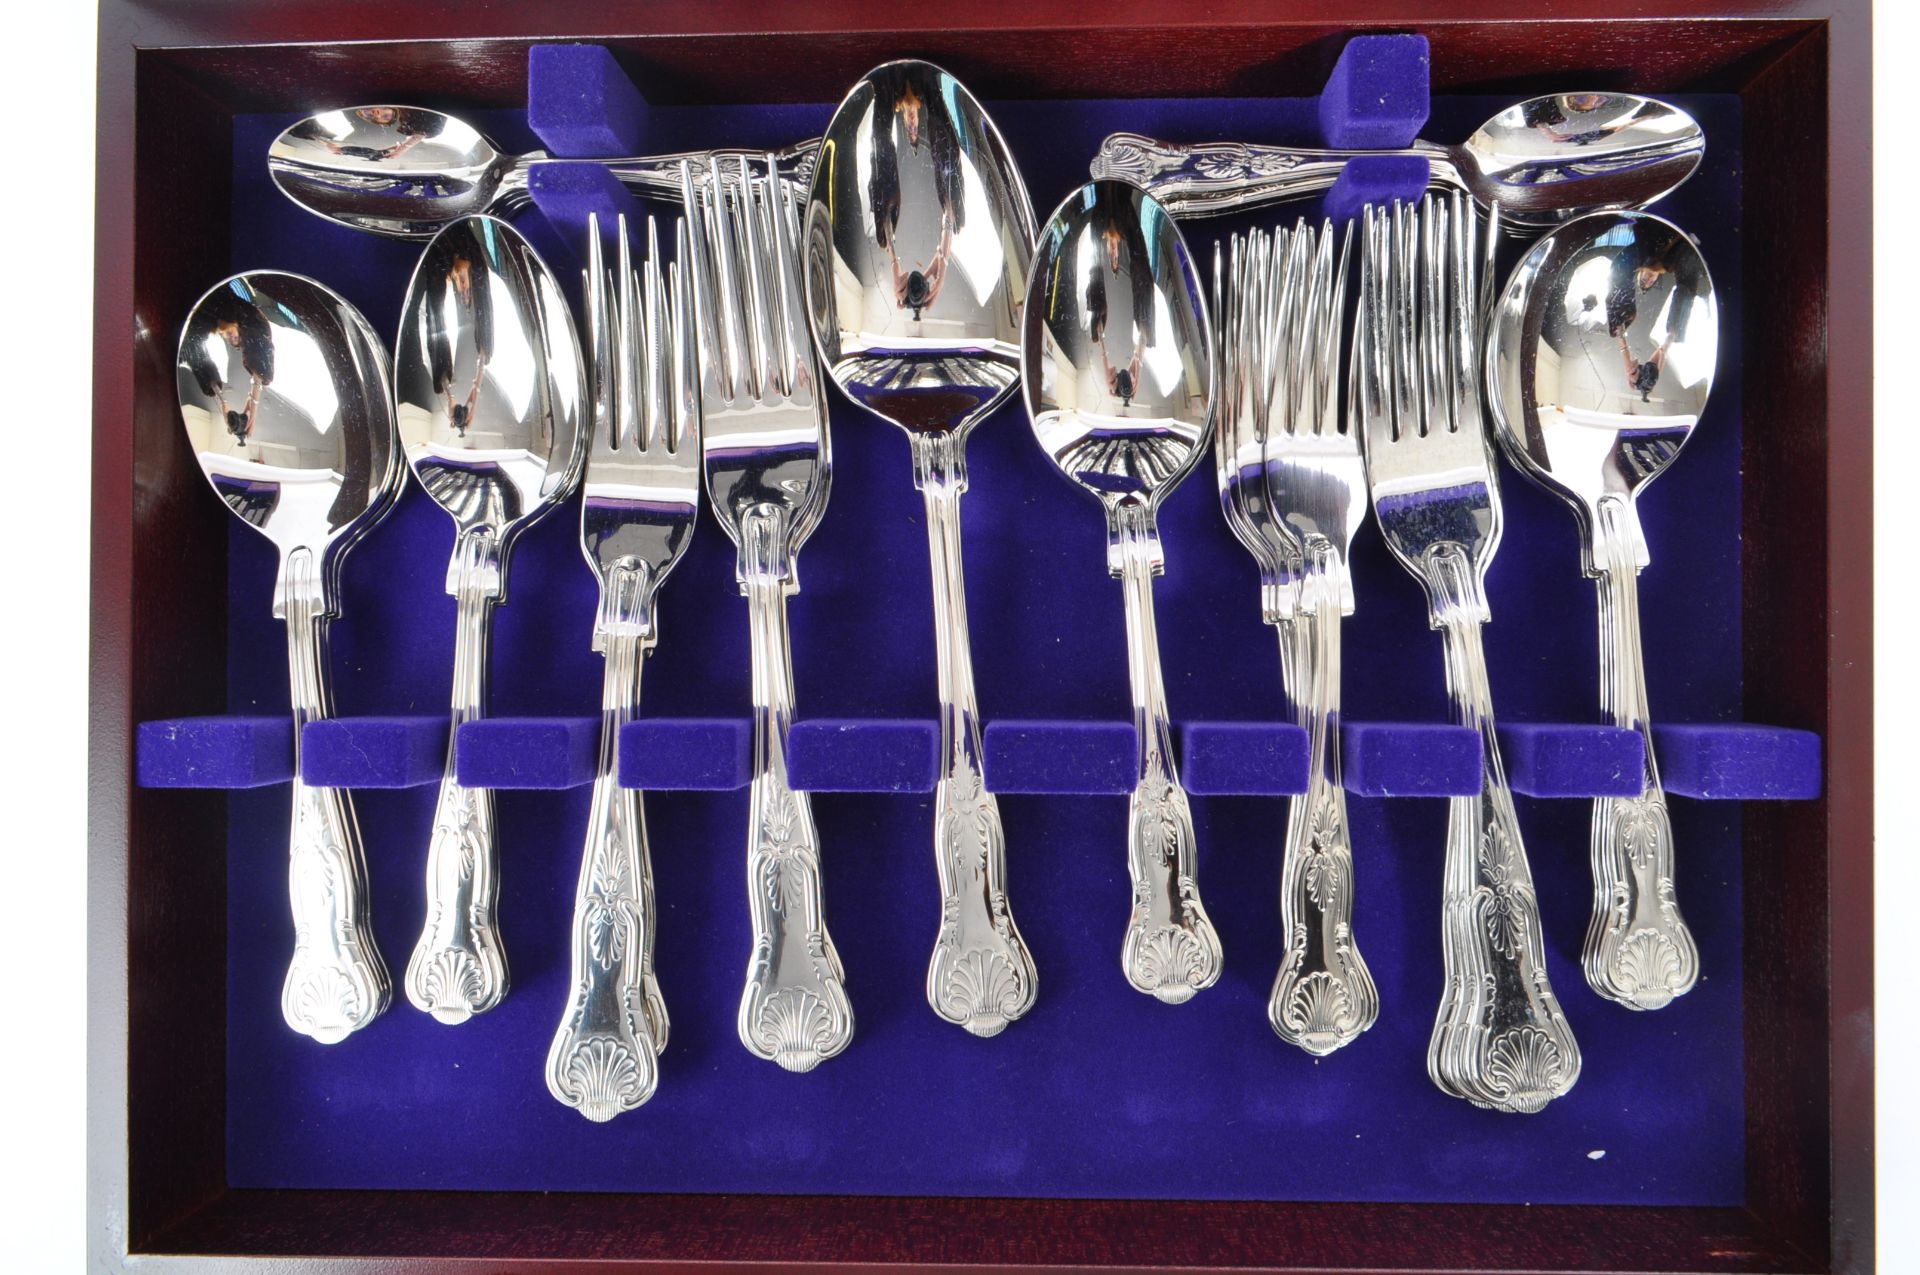 1970S STAINLESS STEEL CUTLERY SET BY ARTHUR PRICE INTERNATIONAL - Image 4 of 11